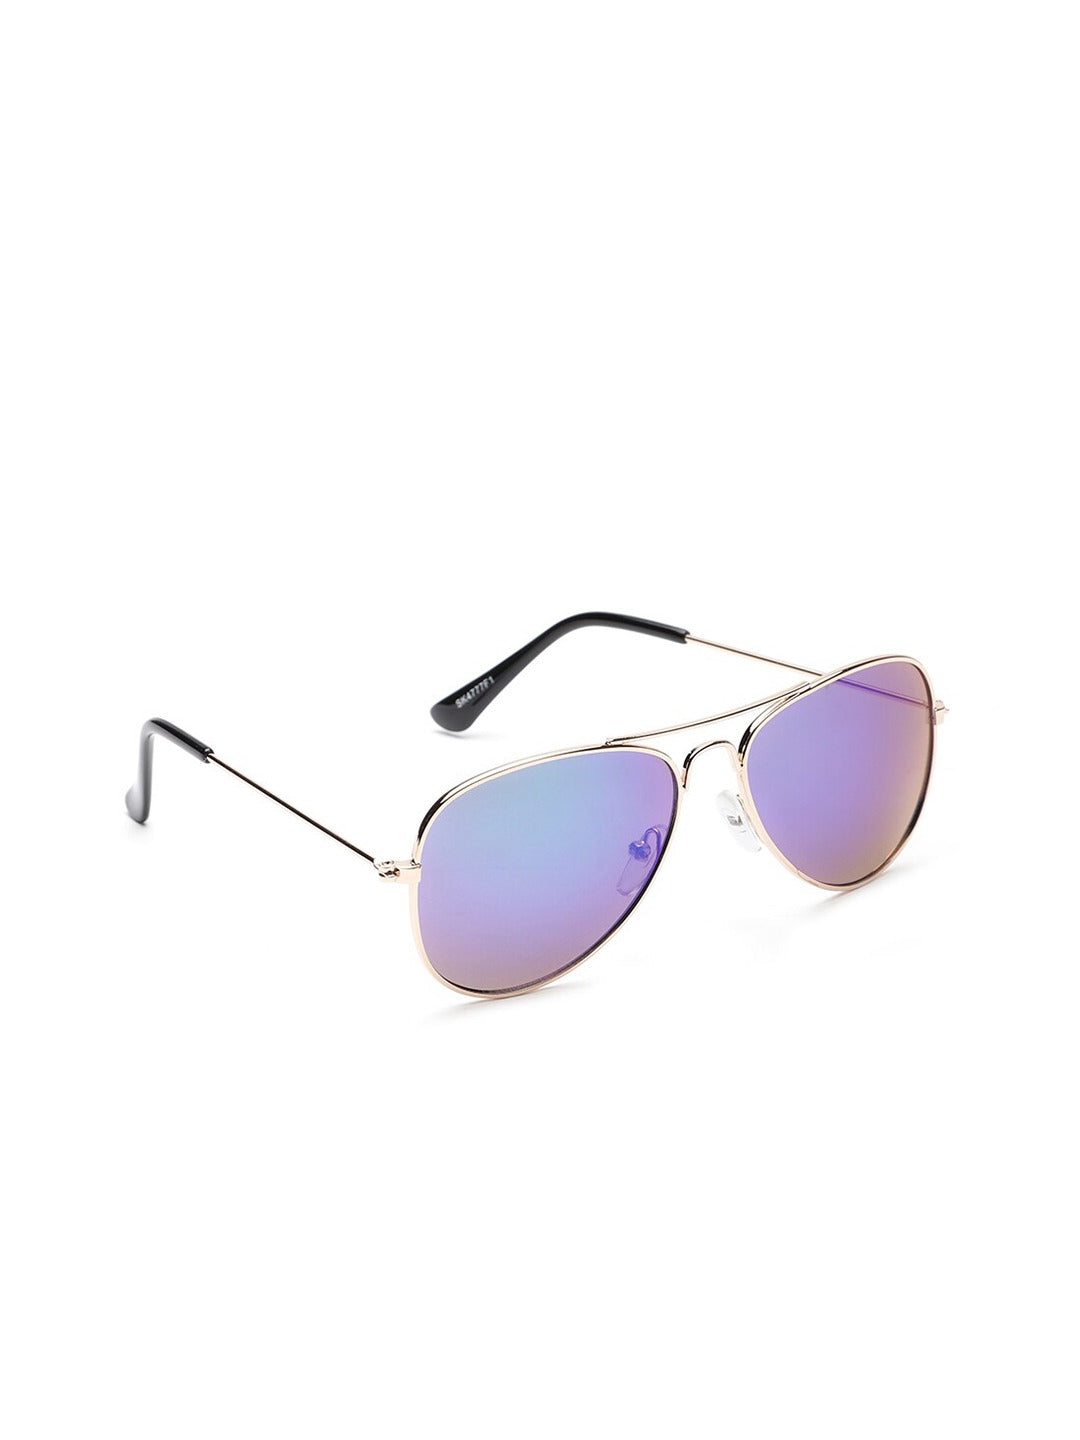 Carlton London Blue Lens  Gold-Toned Aviator Sunglasses With Uv Protected Lens For Boy